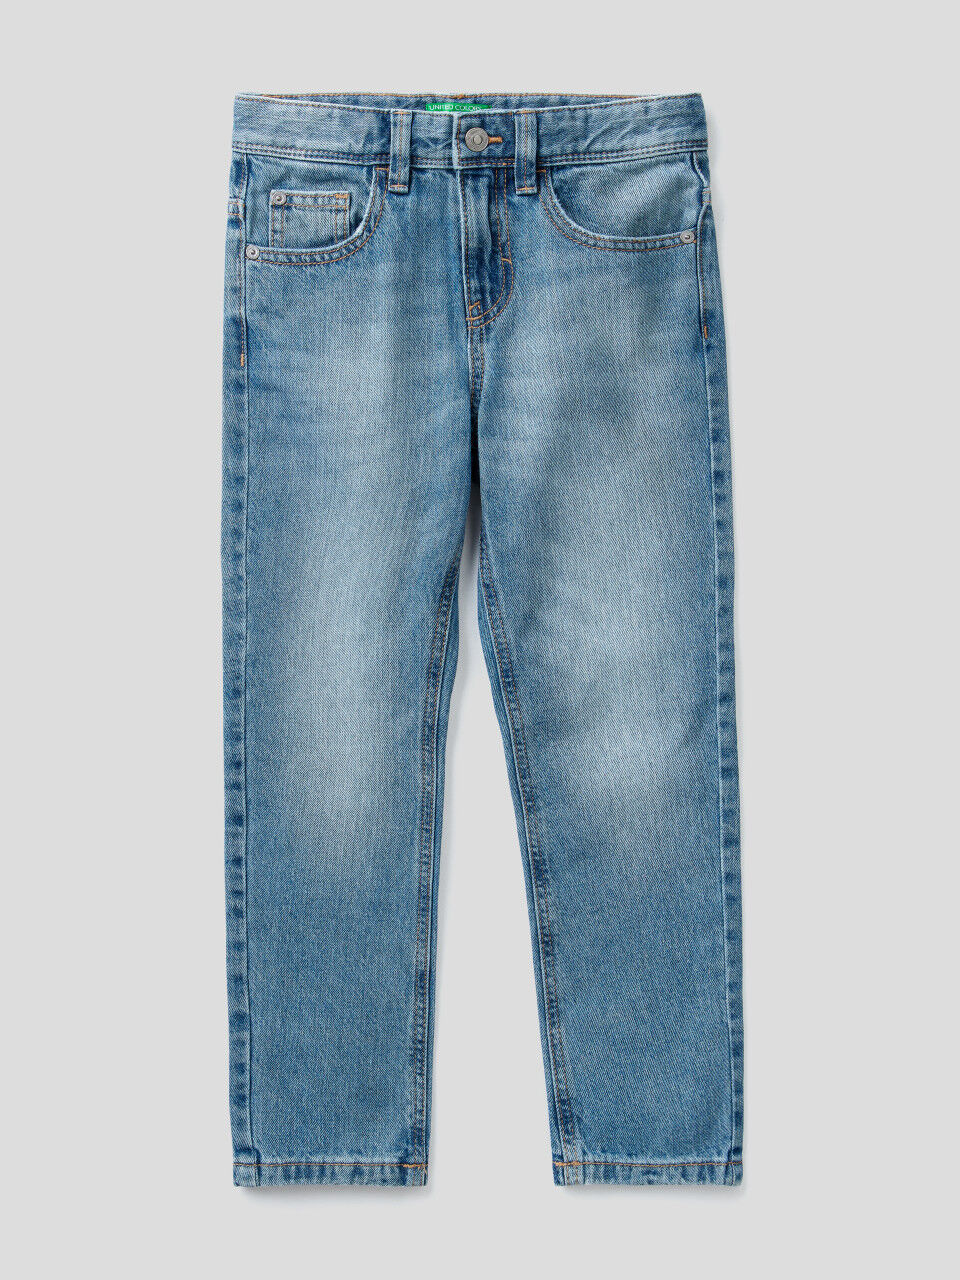 United Colors of Benetton Jeans Bambino